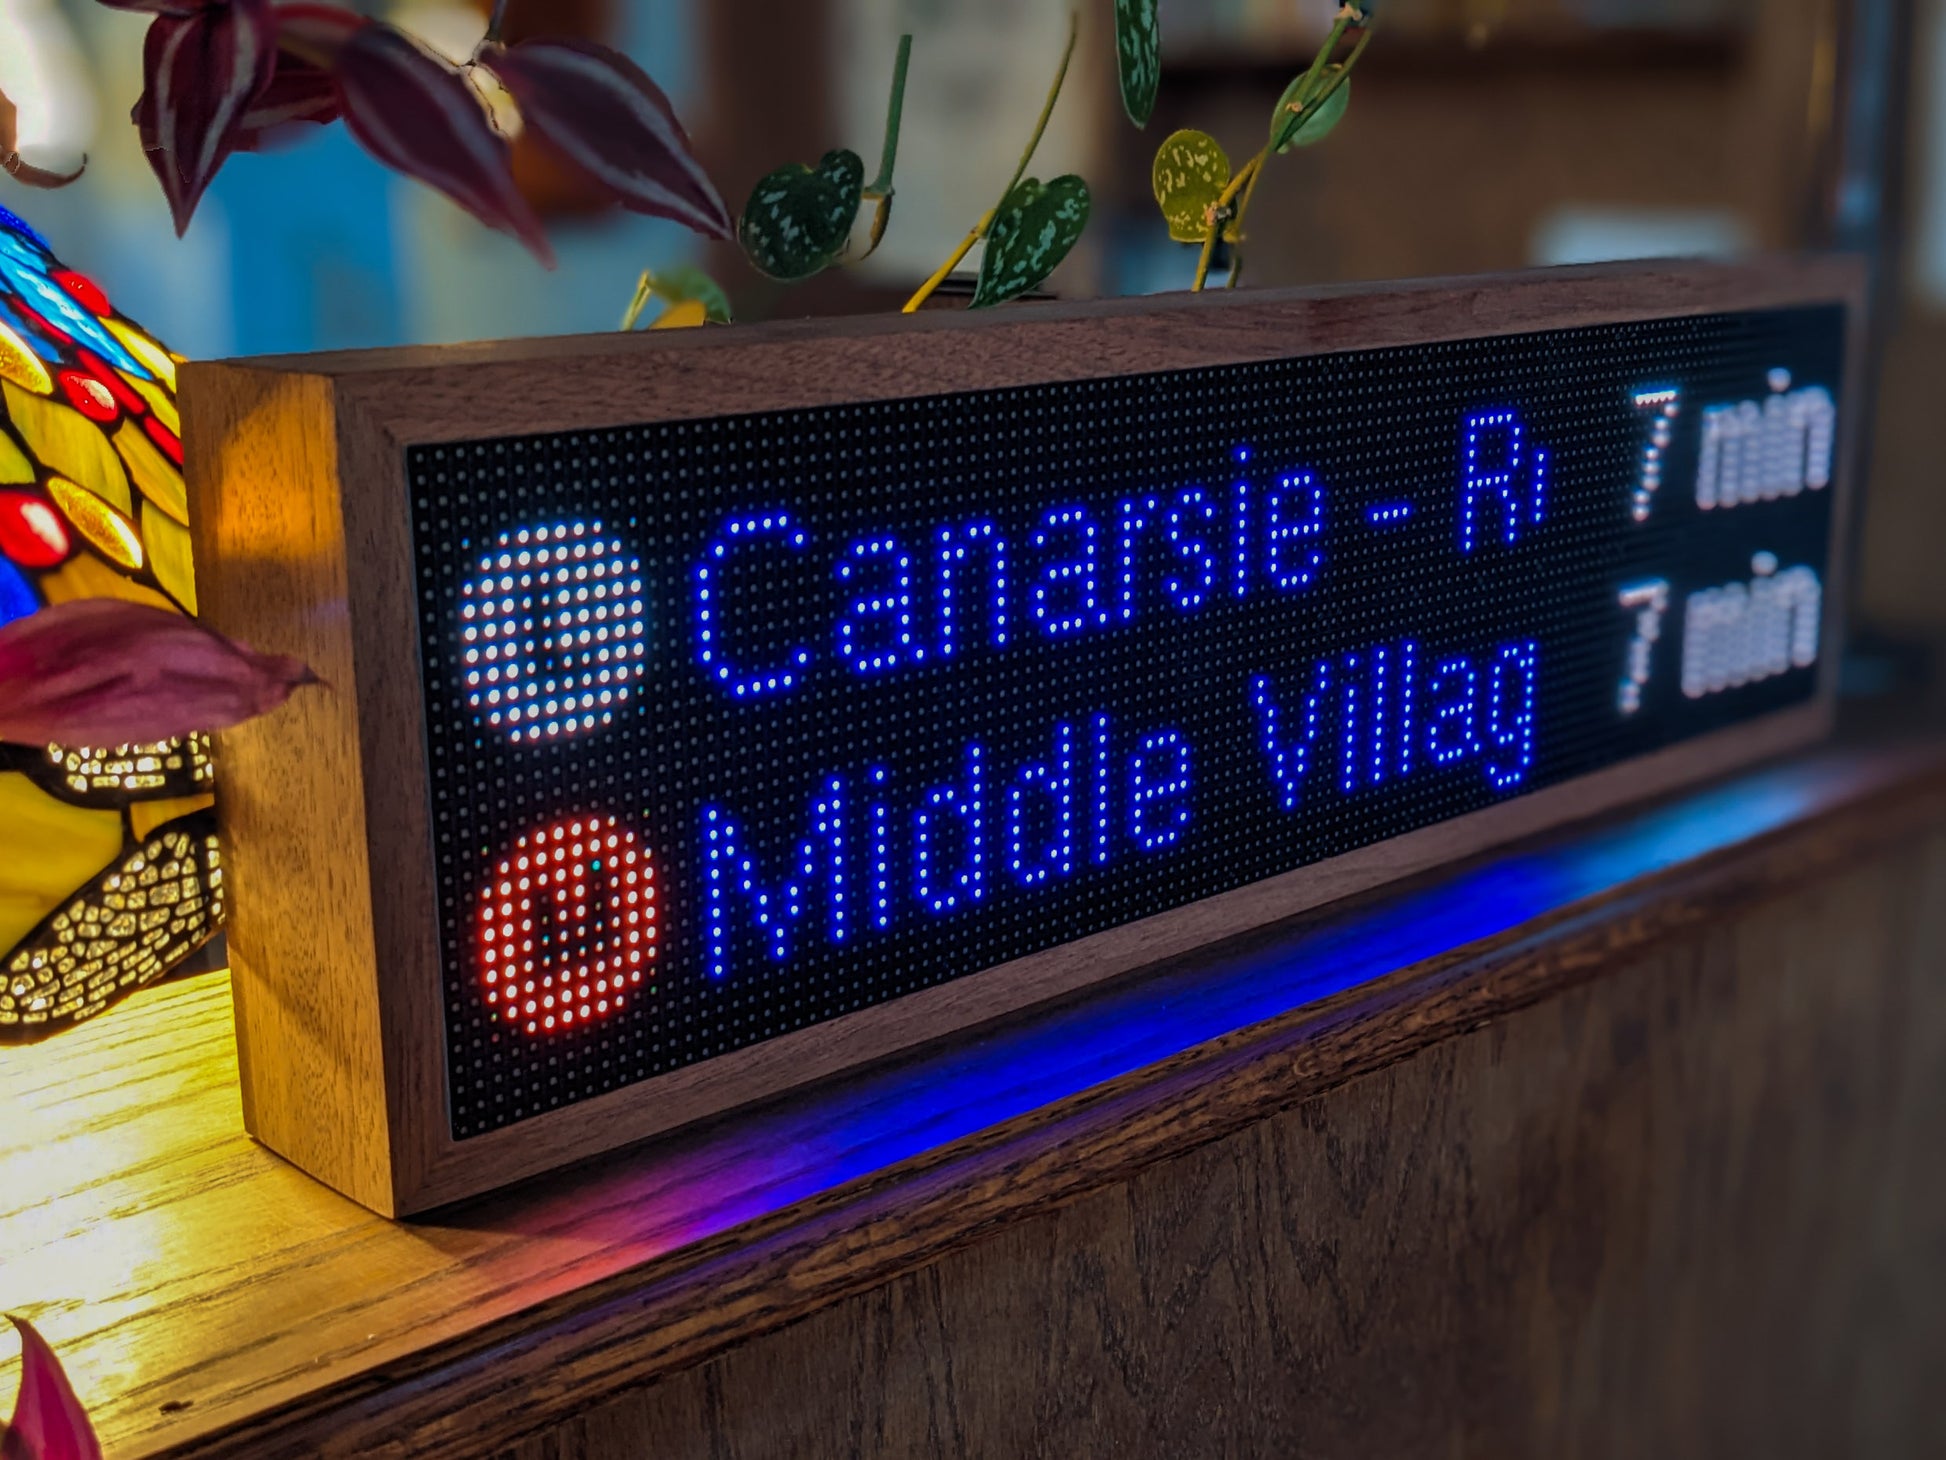 The NYC Realtime Subway Clock is angled on a mahogany shelf. The variagated leaves and vines of plants drape near it. The Mahogany frame hold a black LED screen that reads, "L Canarsie -R 7 min" and "M Middle Villag 7 min" A tiffany style lamp glows warmly to the left.